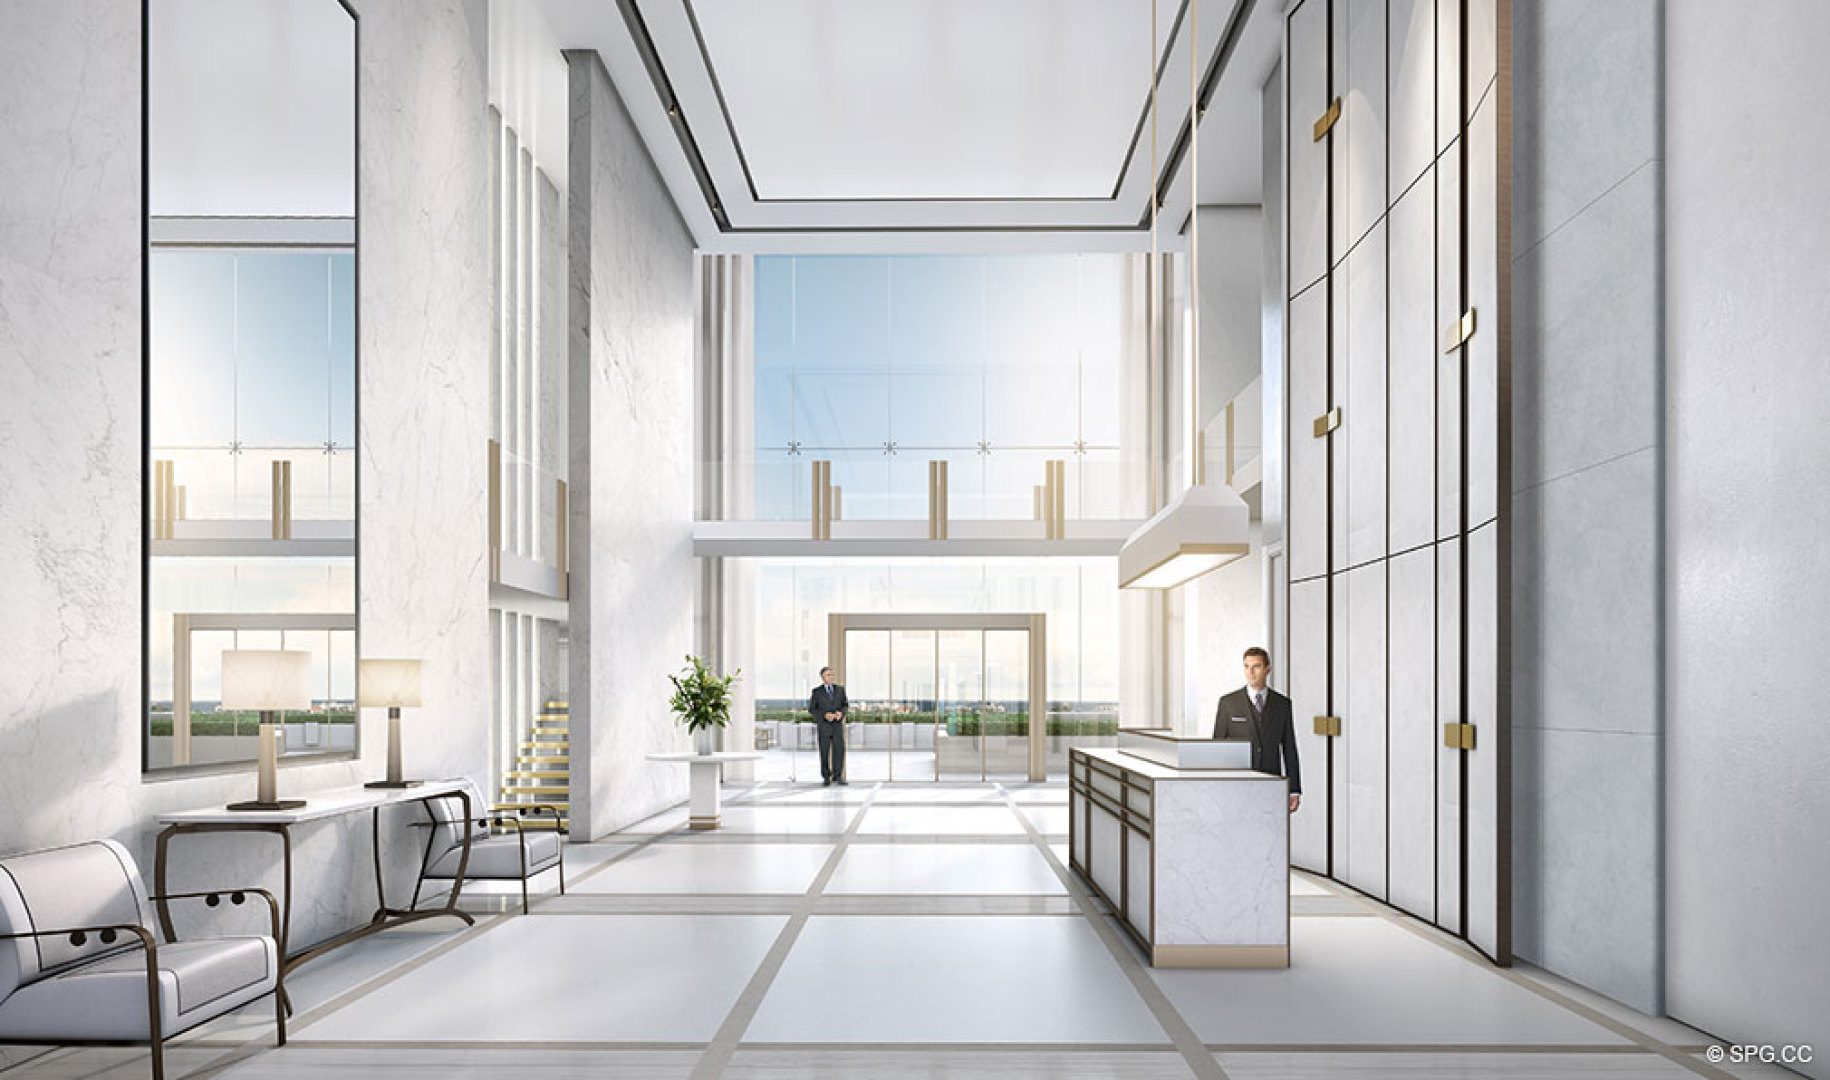 Main Lobby inside The Bristol, Luxury Waterfront Condos in West Palm Beach, Florida 33401